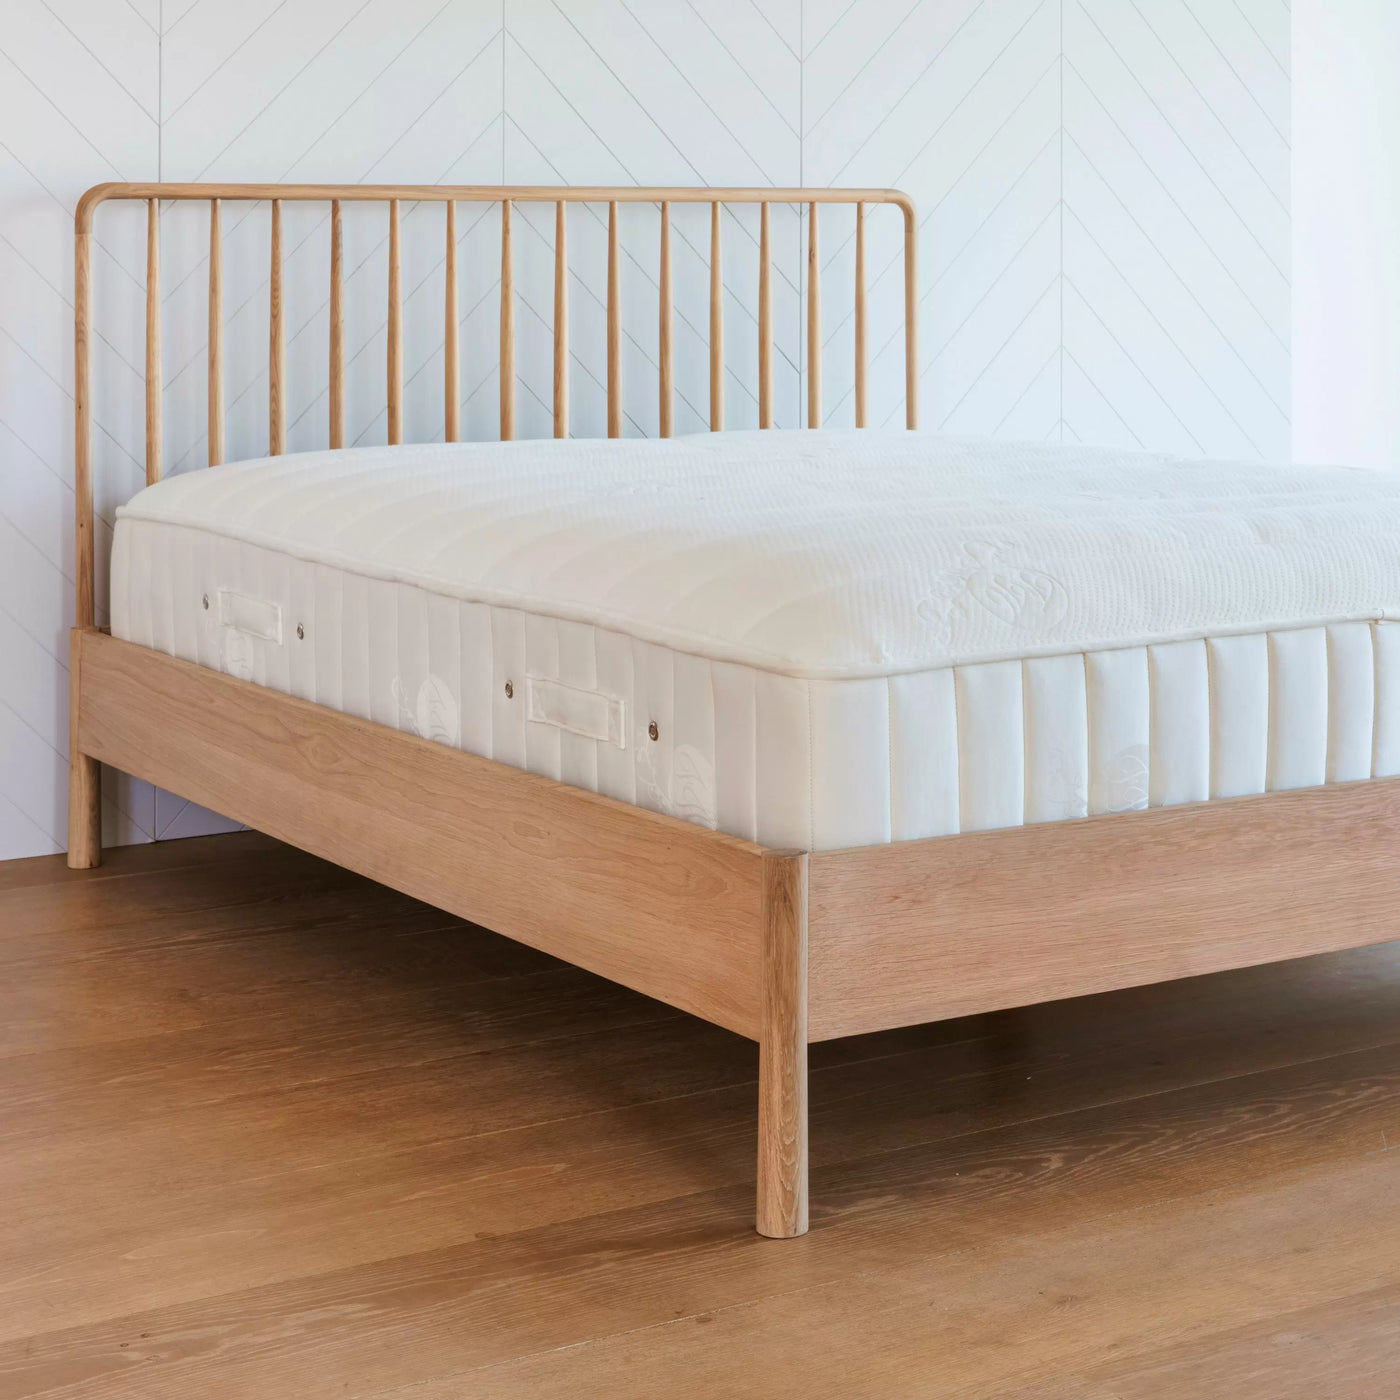 Holbeach 6' Spindle Bed